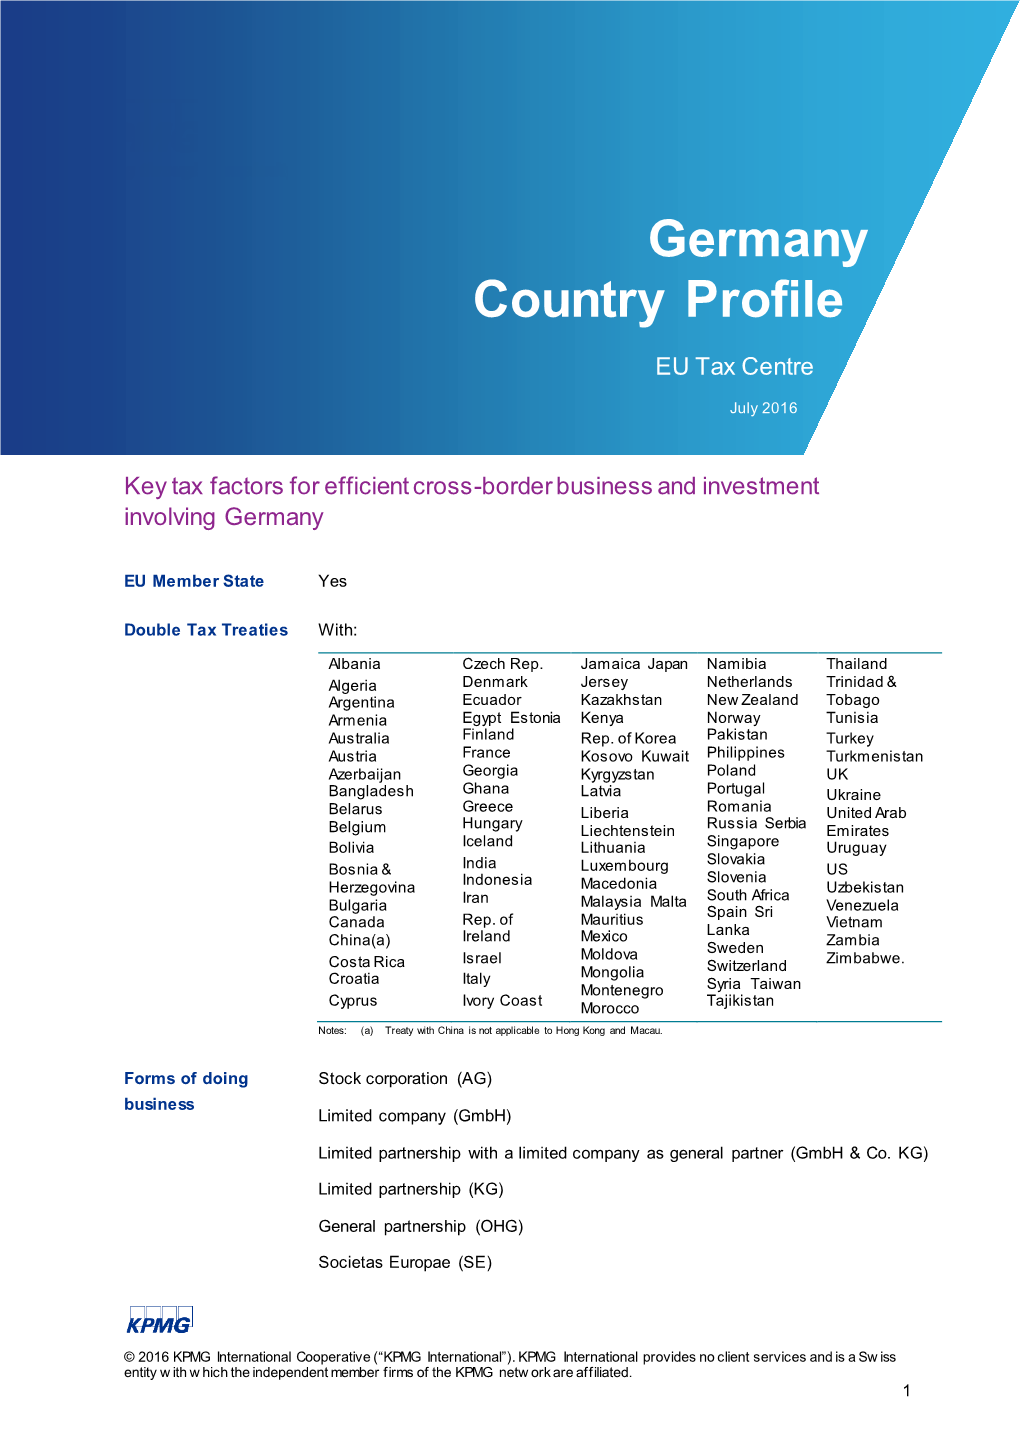 Germany Country Profile